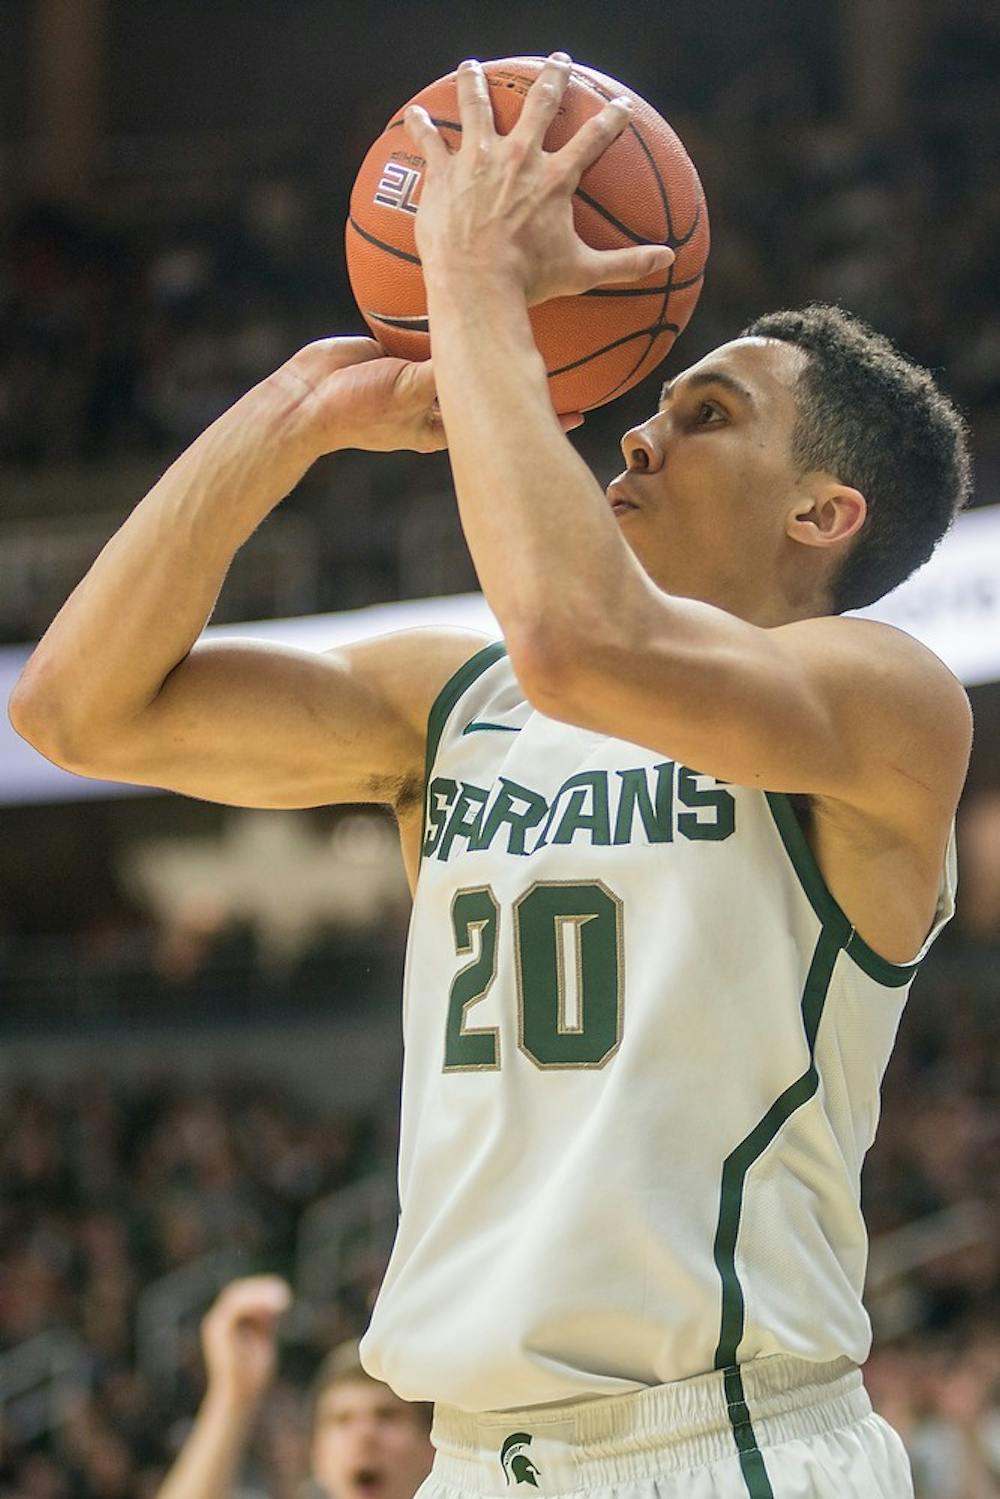 <p>Senior guard Travis Trice attempts a point Jan. 5, 2015, during the game against Indiana at Breslin Center. The Spartans defeated the Hoosiers, 70-50. Erin Hampton/The State News</p>